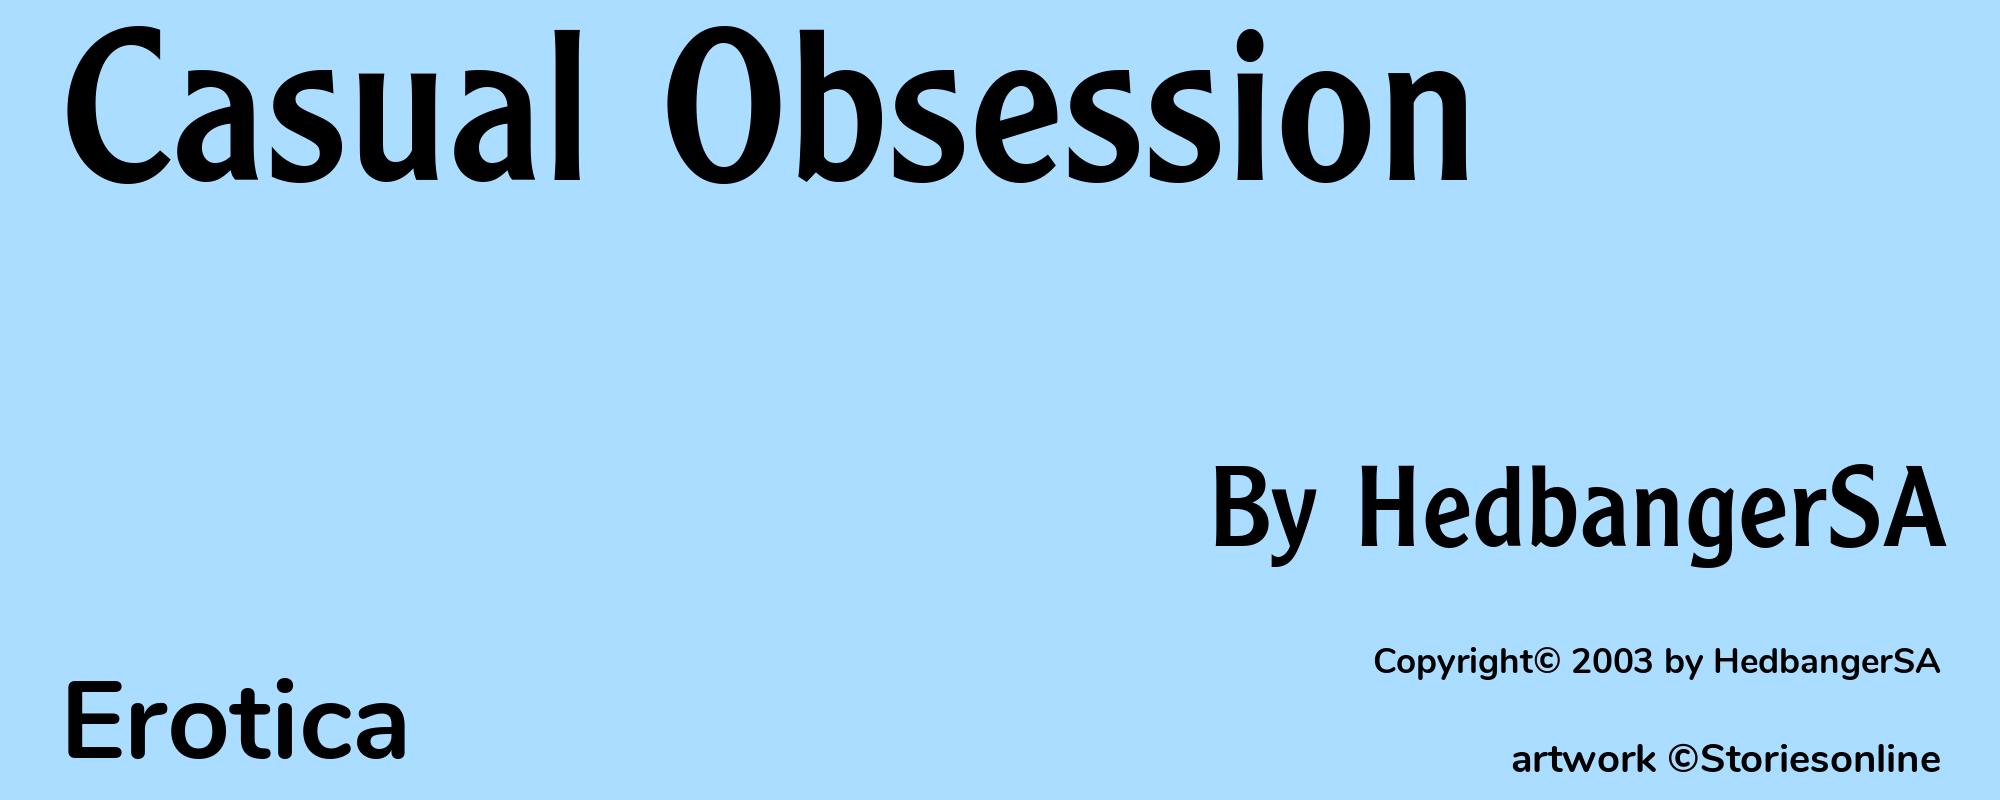 Casual Obsession - Cover